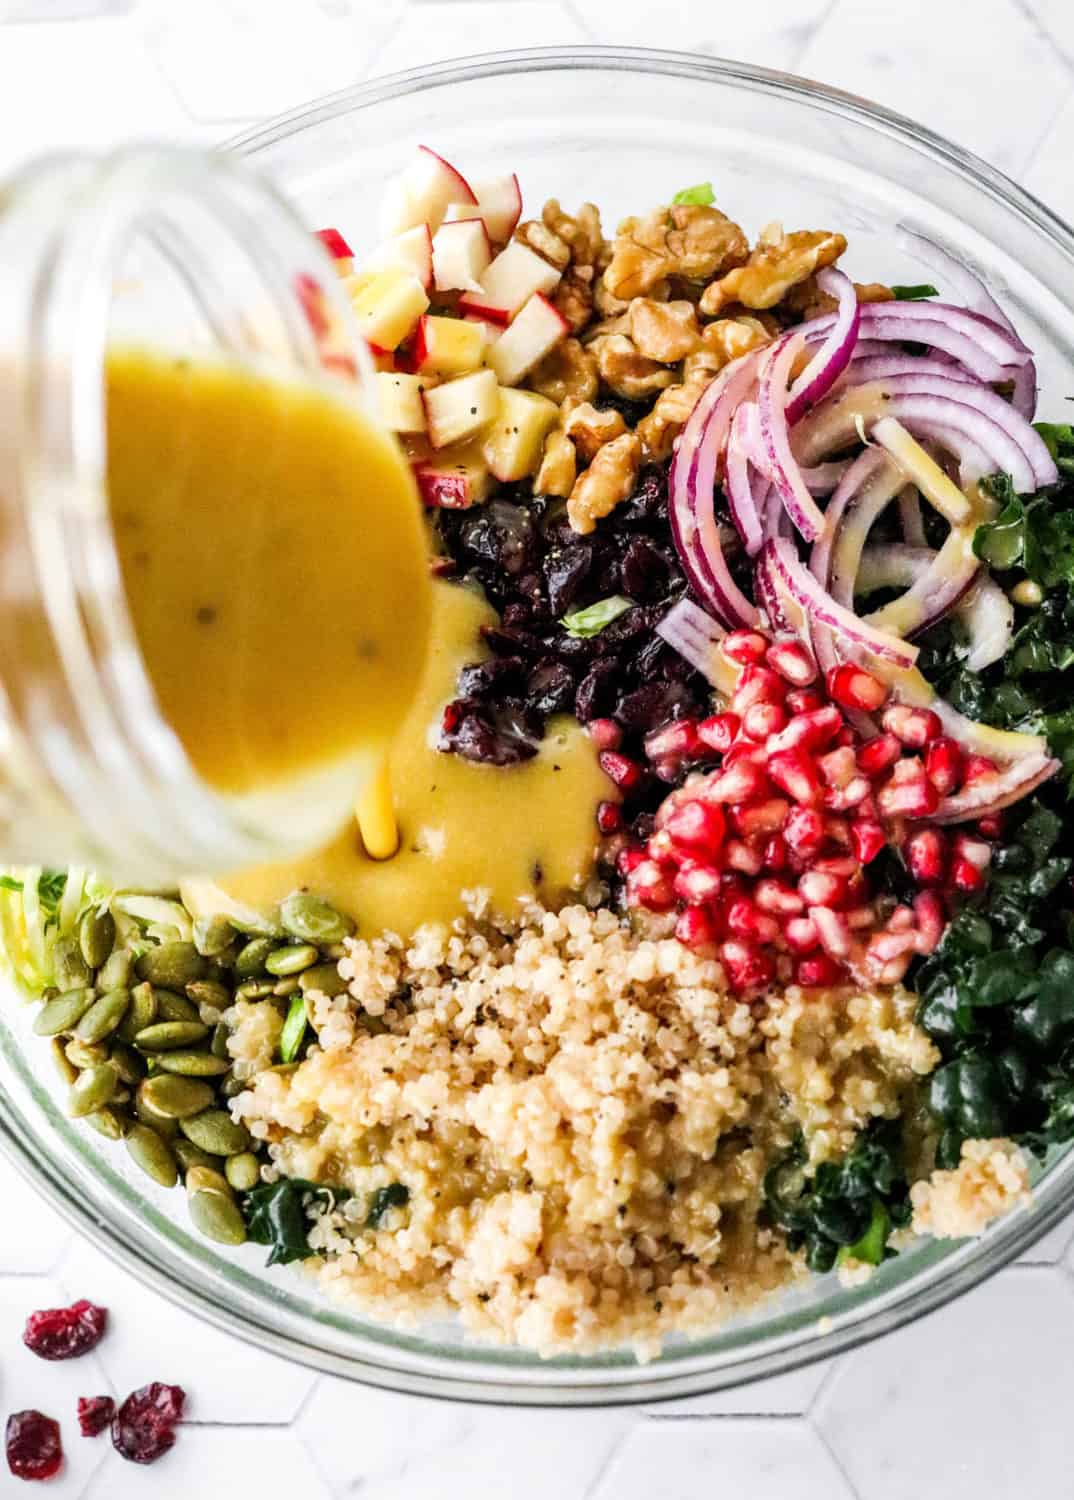 Must Make Chopped Kale Salad With Quinoa - Pinch Me Good